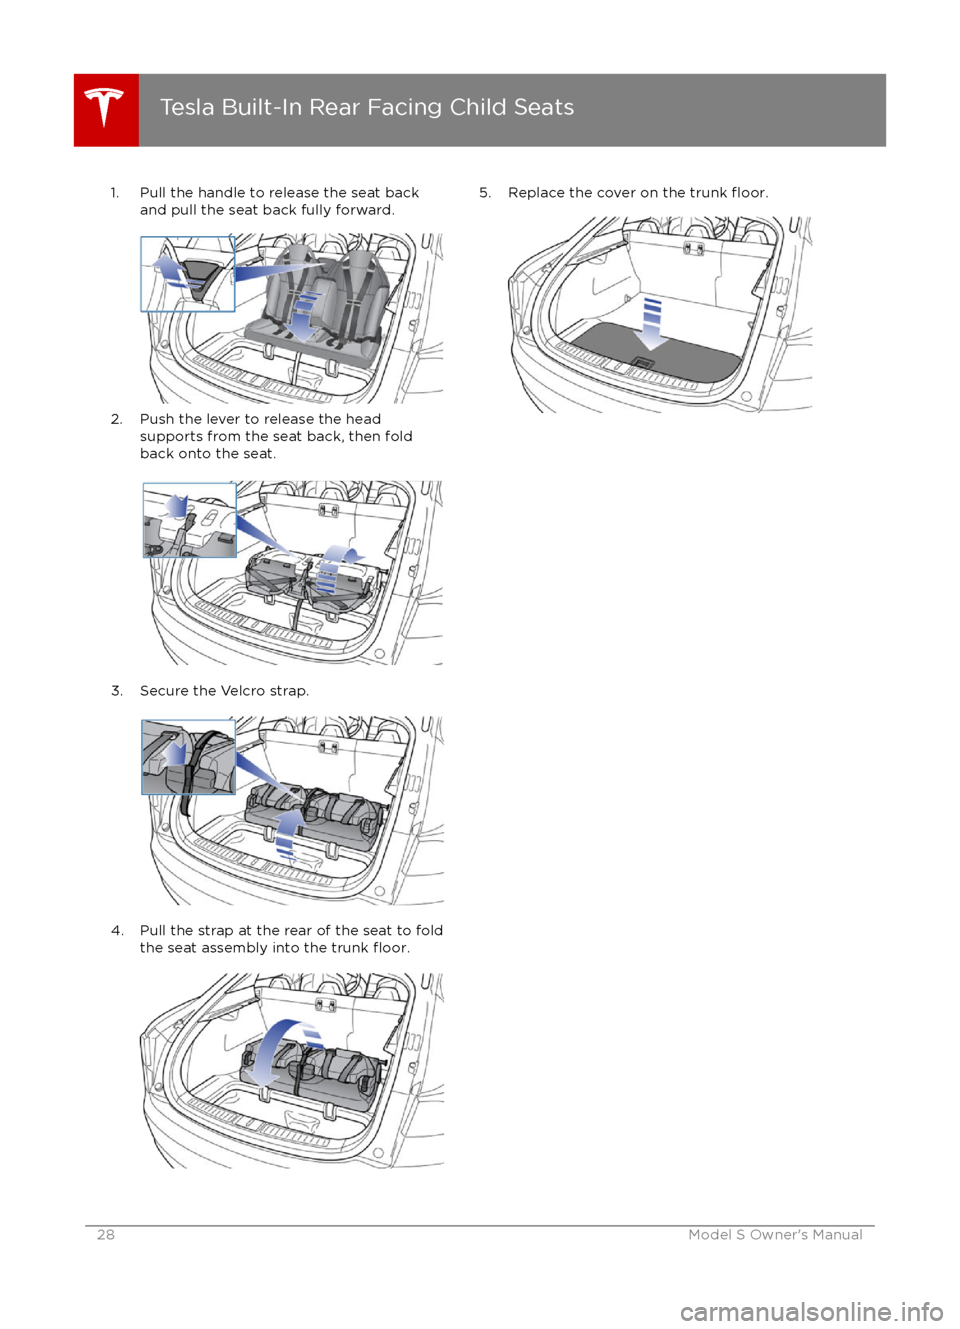 TESLA MODEL S 2016  Owners Manual 1. Pull the handle to release the seat backand pull the seat back fully forward.
2. Push the lever to release the head supports from the seat back, then fold
back onto the seat.
3. Secure the Velcro s